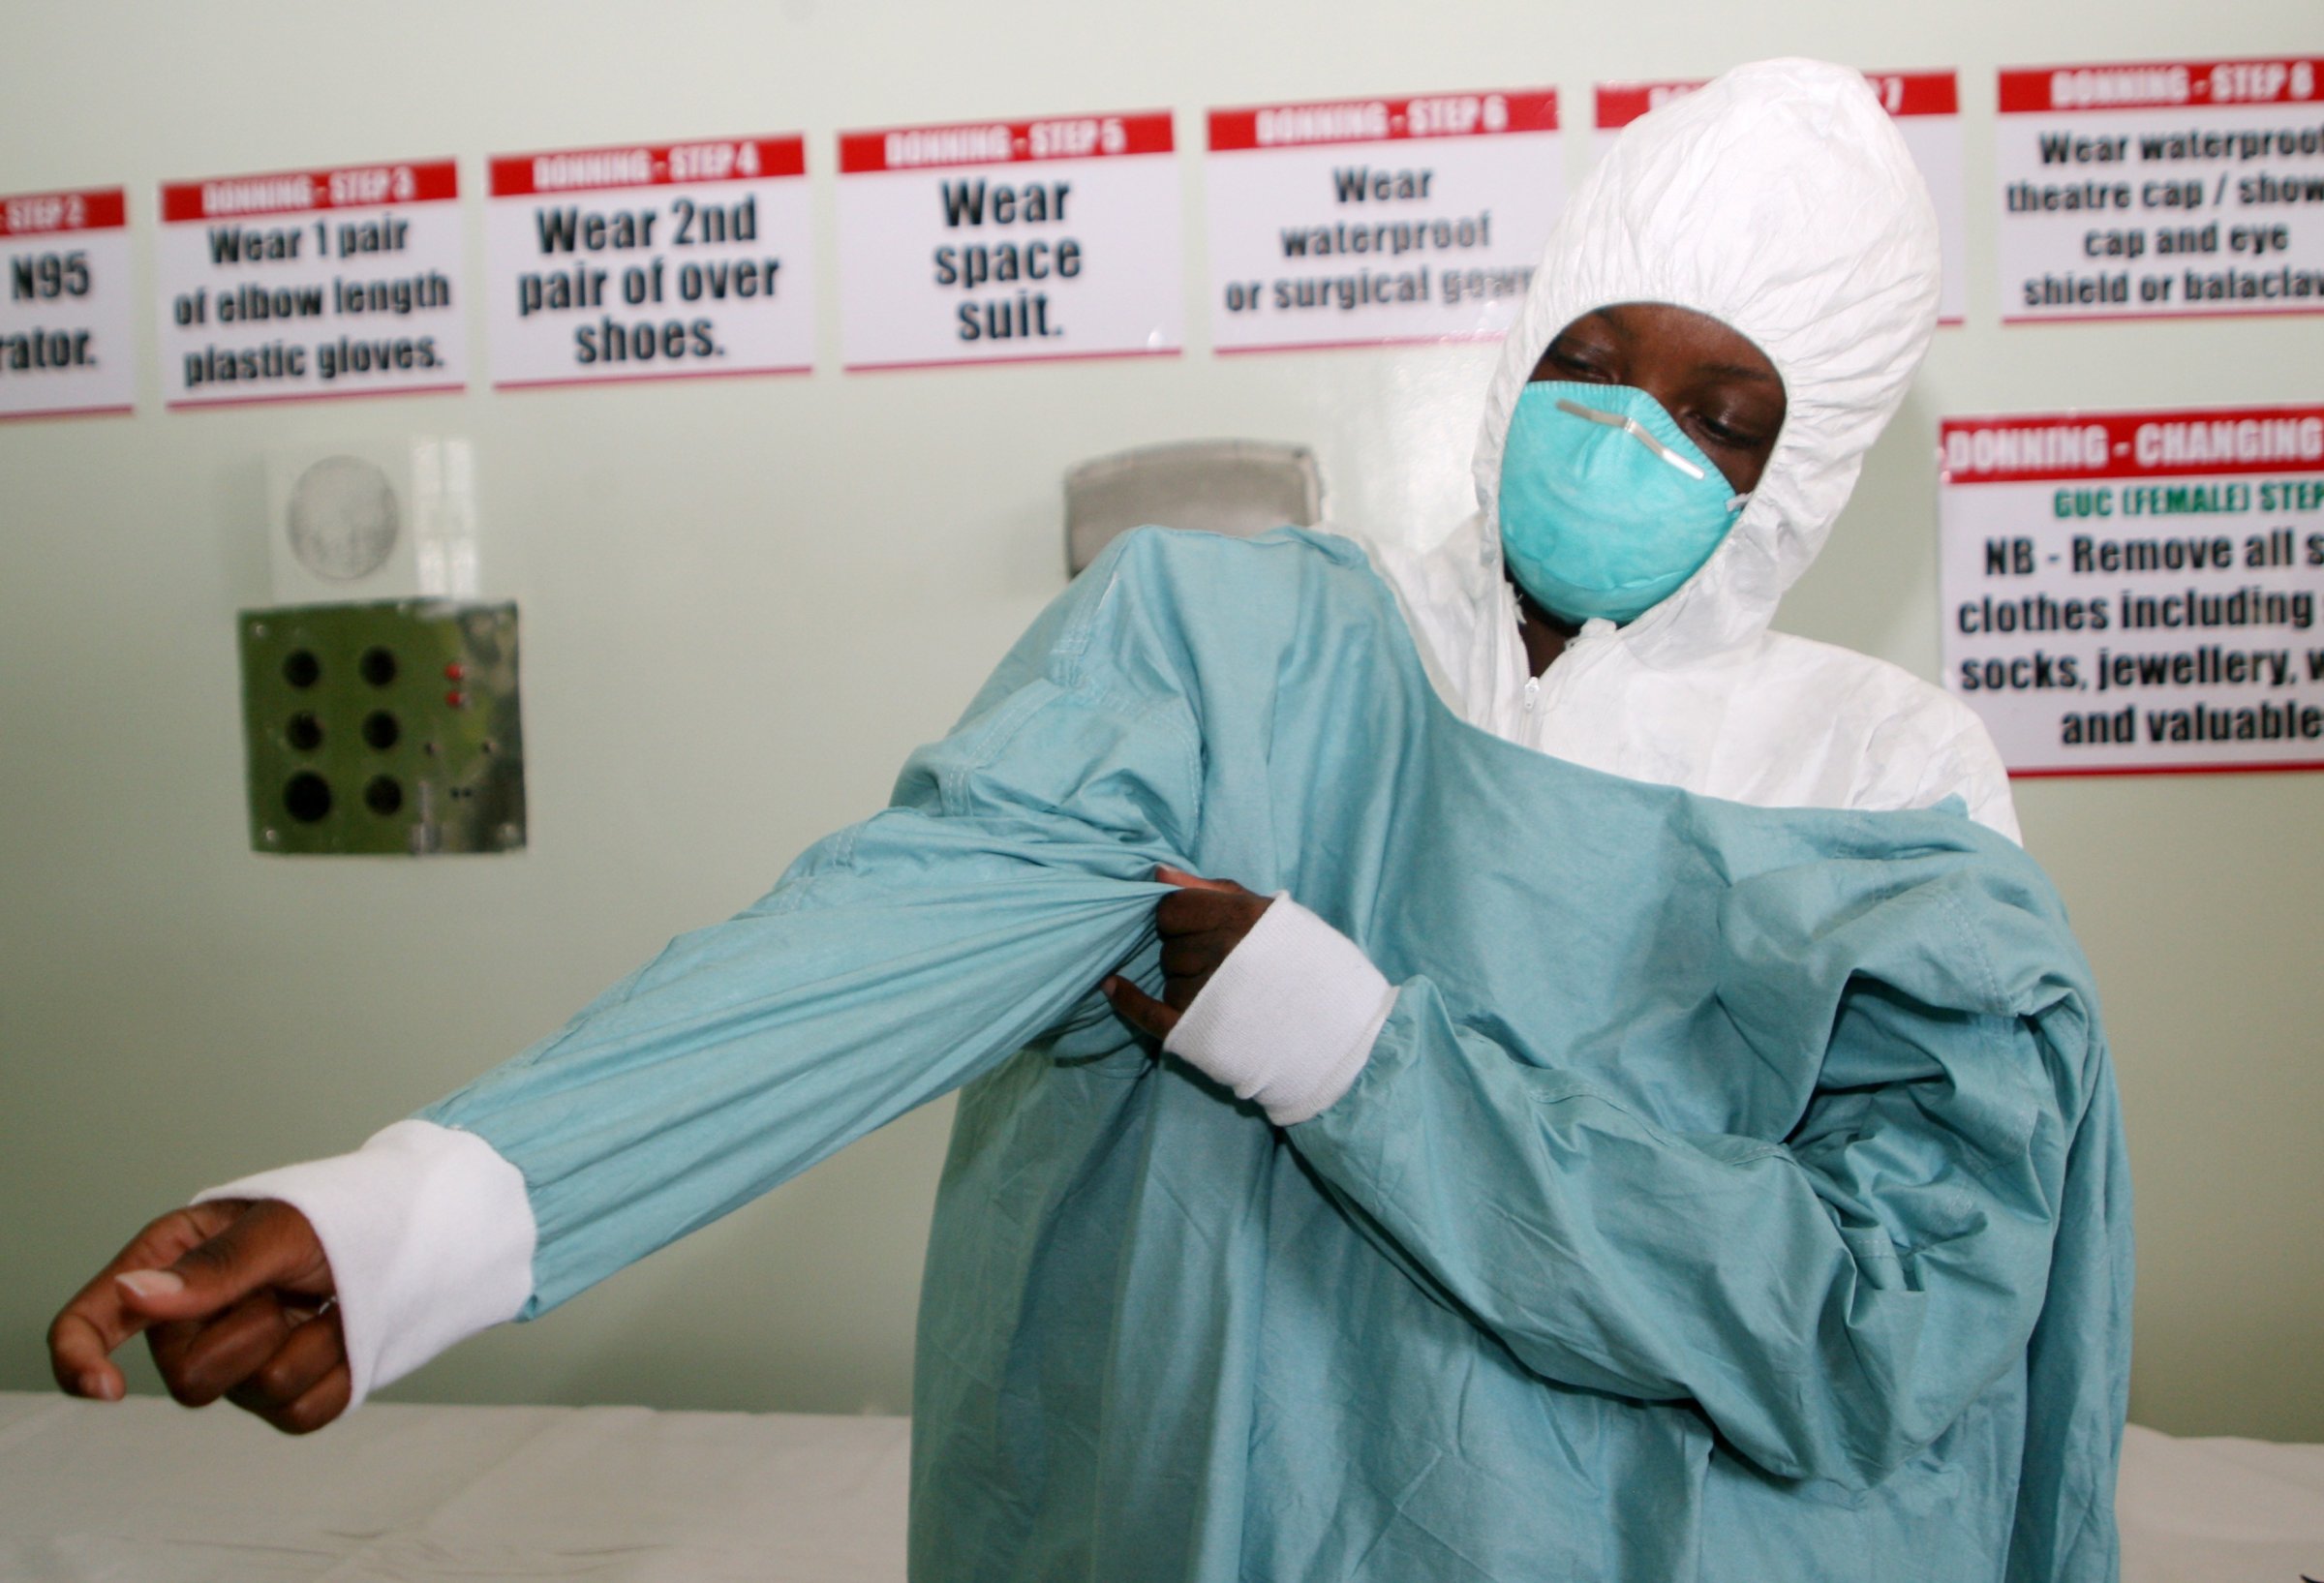 A nurse puts on protective gear during a demonstration at a quarantine unit set up at Wilkins Infectious Diseases Hospital in Harare on Sept. 26, 2014 to deal with ebola virus cases in the event of any outbreak.